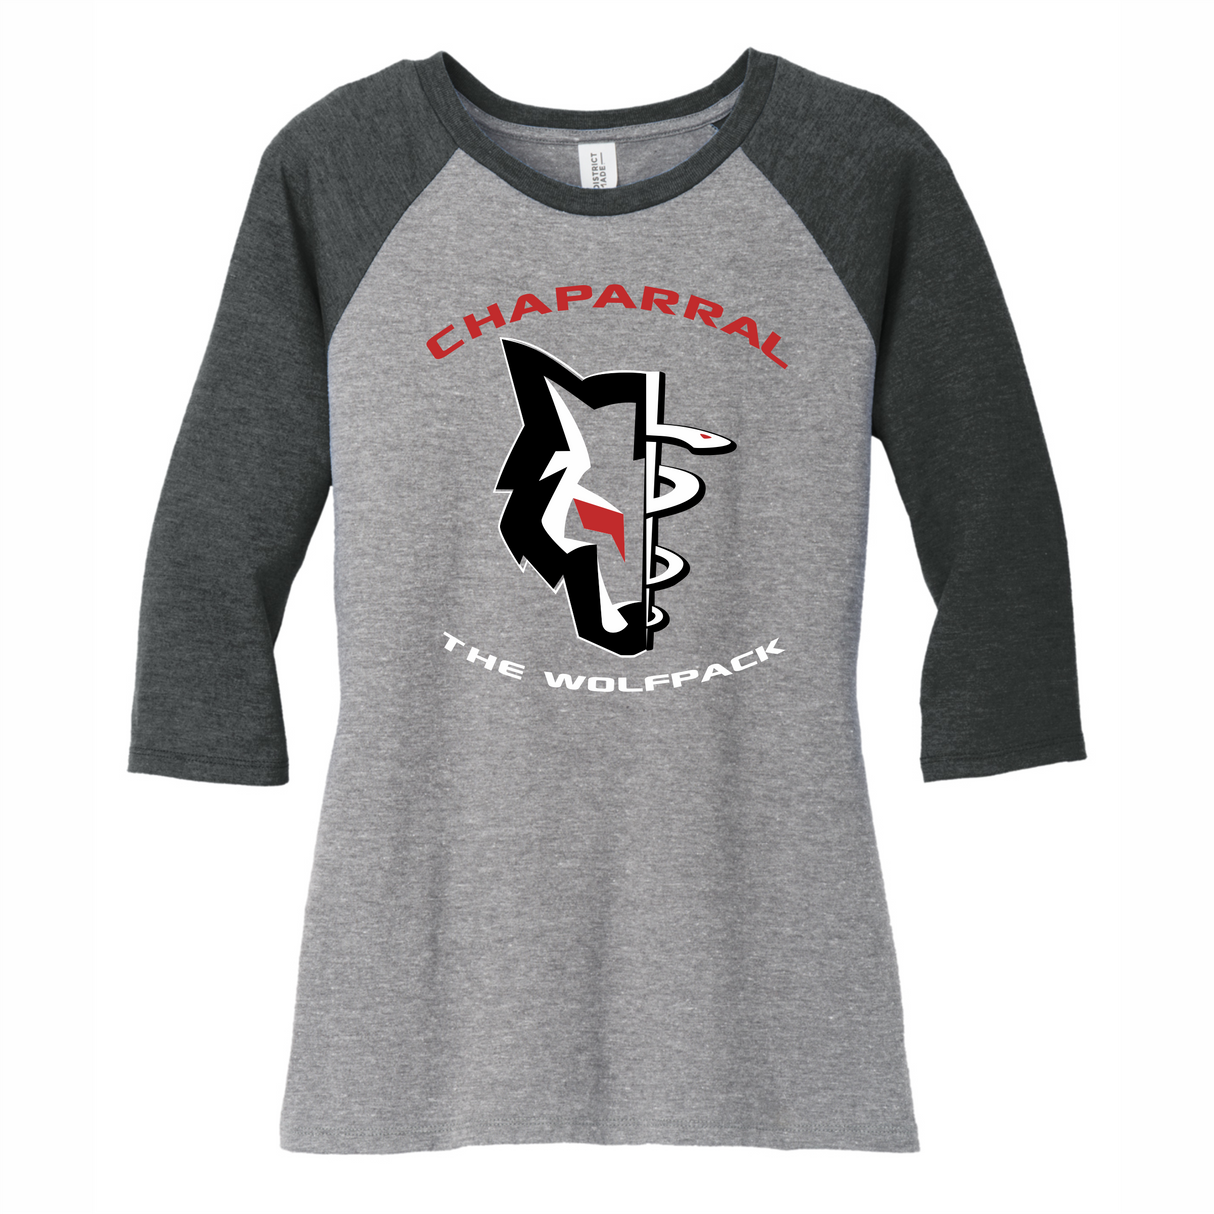 Chaparral HS Athletic Training Women's 3/4-Sleeve Tee